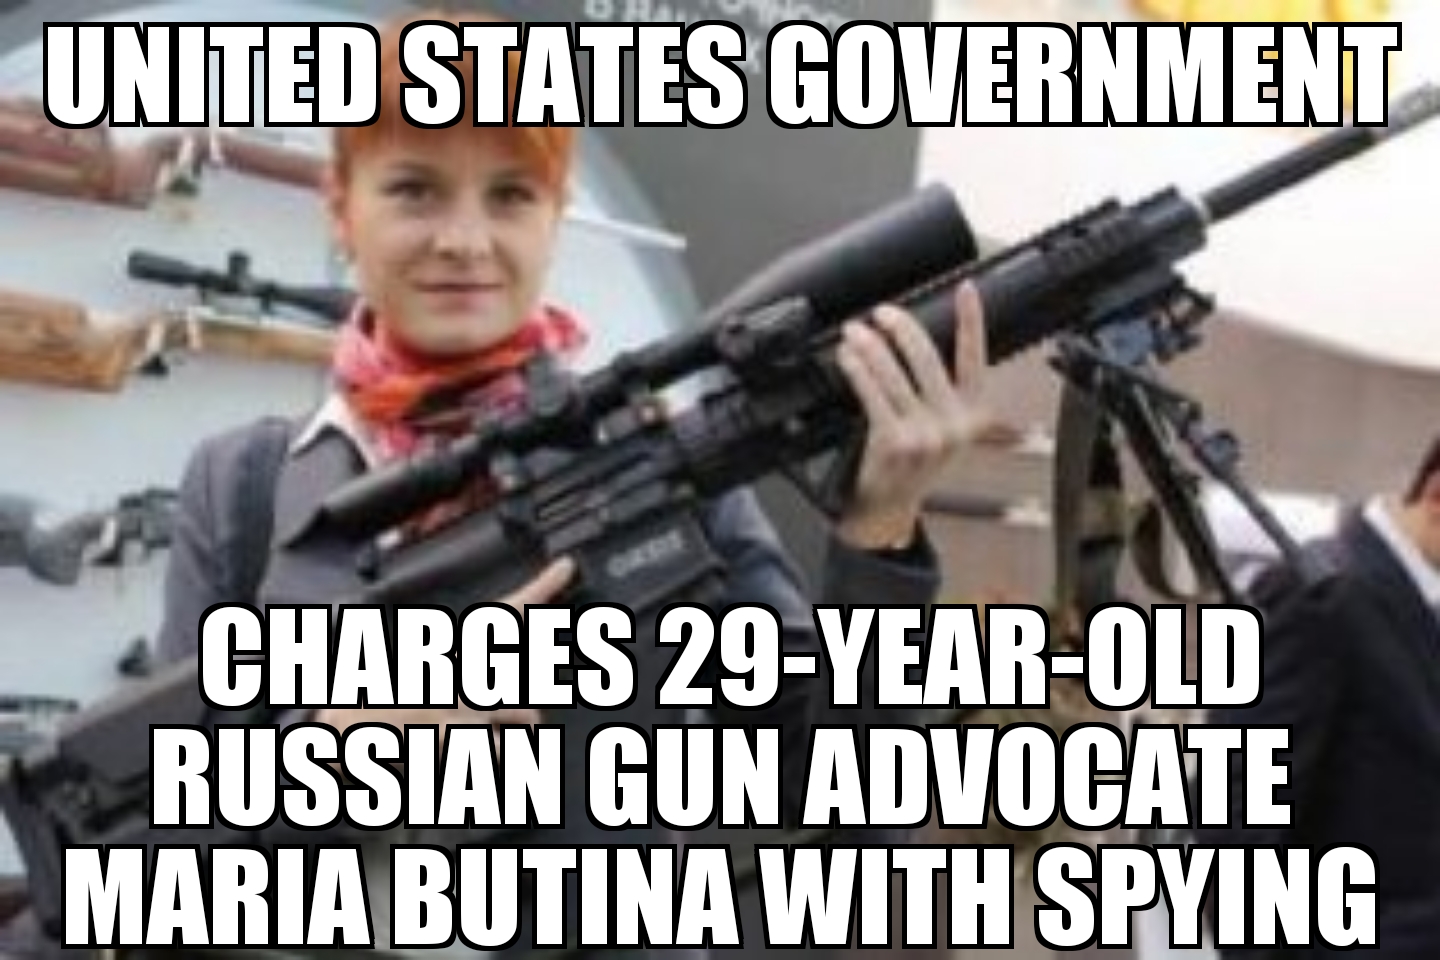 Maria Butina charged with spying